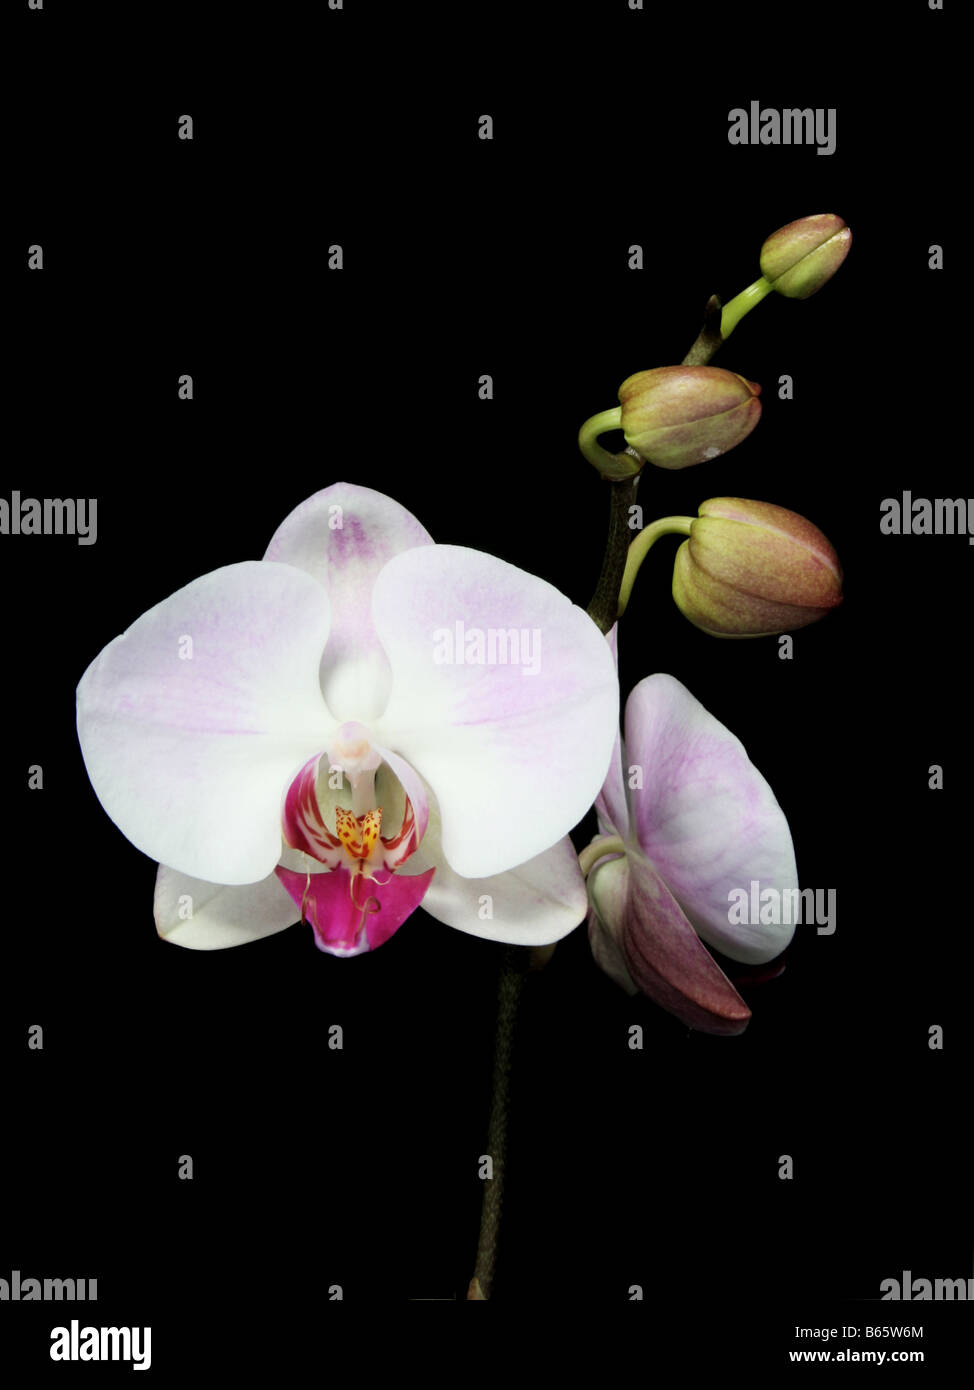 White and pink phalaenopsis orchids on black background Stock Photo